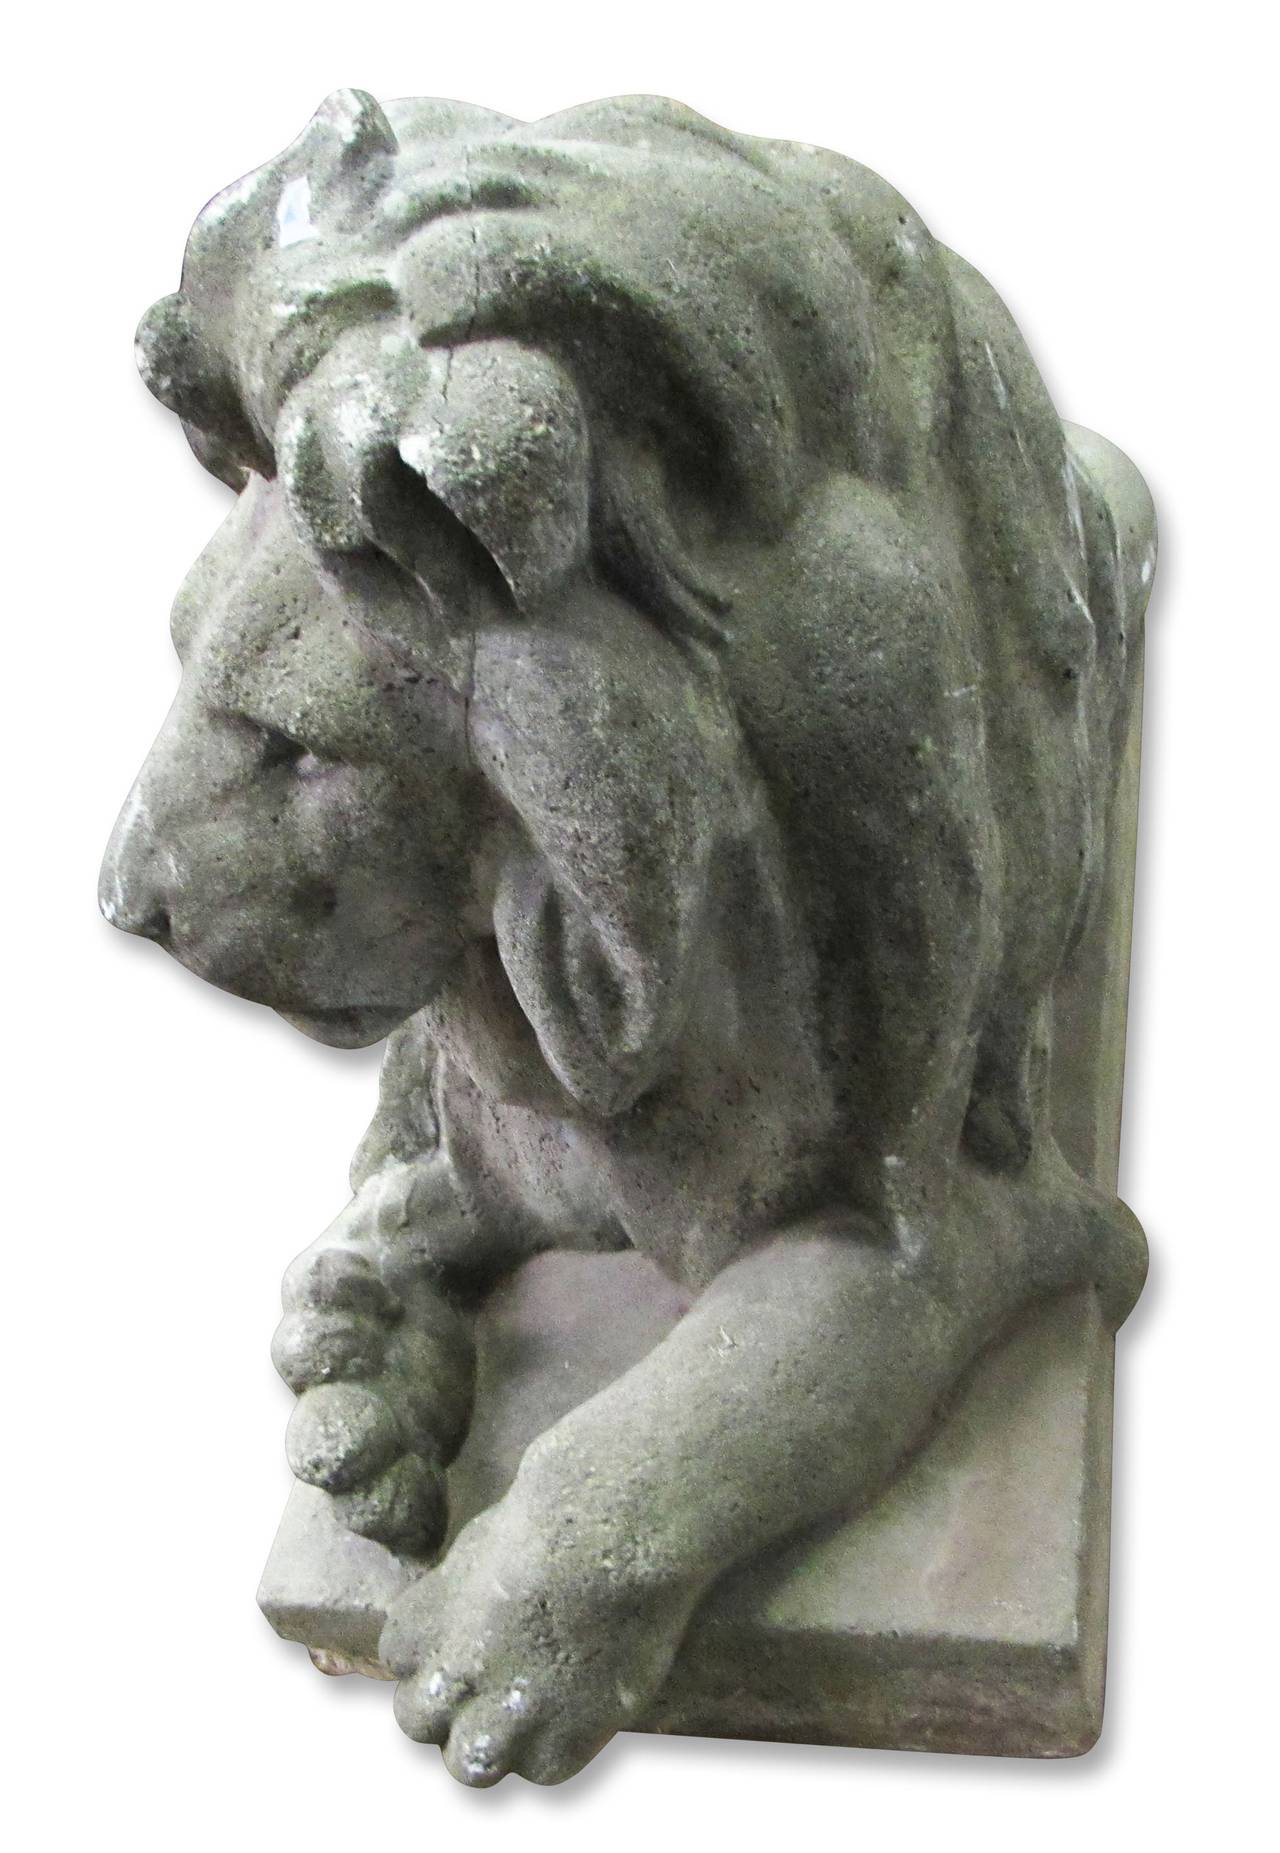 Here is a pair of cast concrete opposing reclining lions from South Florida with age appropriate wear. These can be viewed at our National Warehouse at 400 Gilligan Street in Scranton, PA.